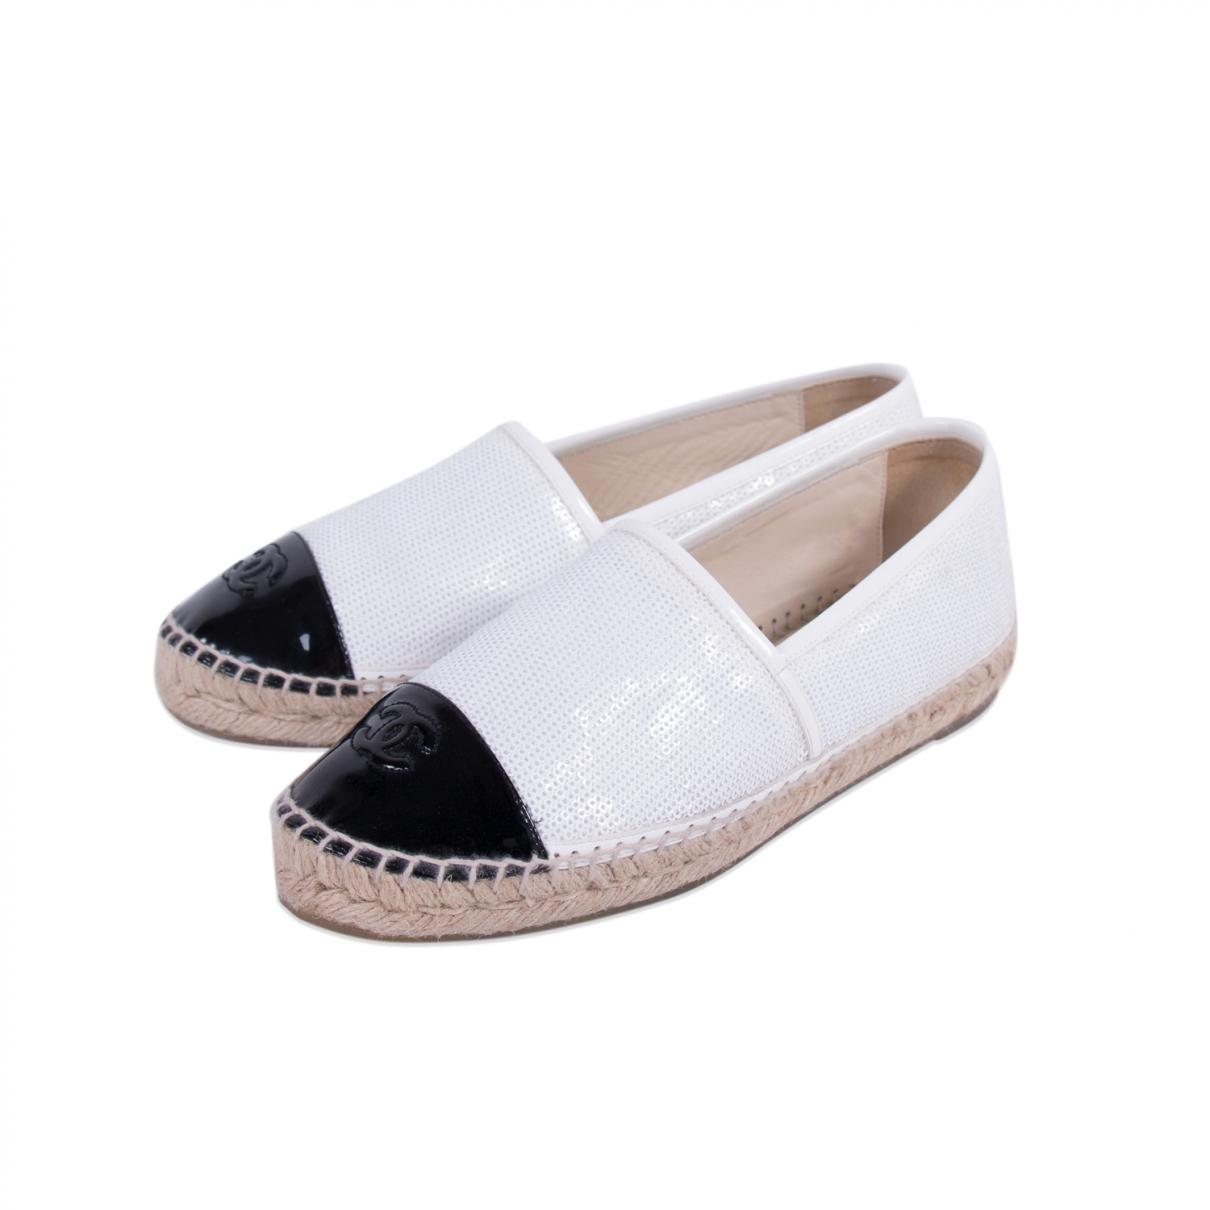 Chanel White Patent Leather Espadrilles 